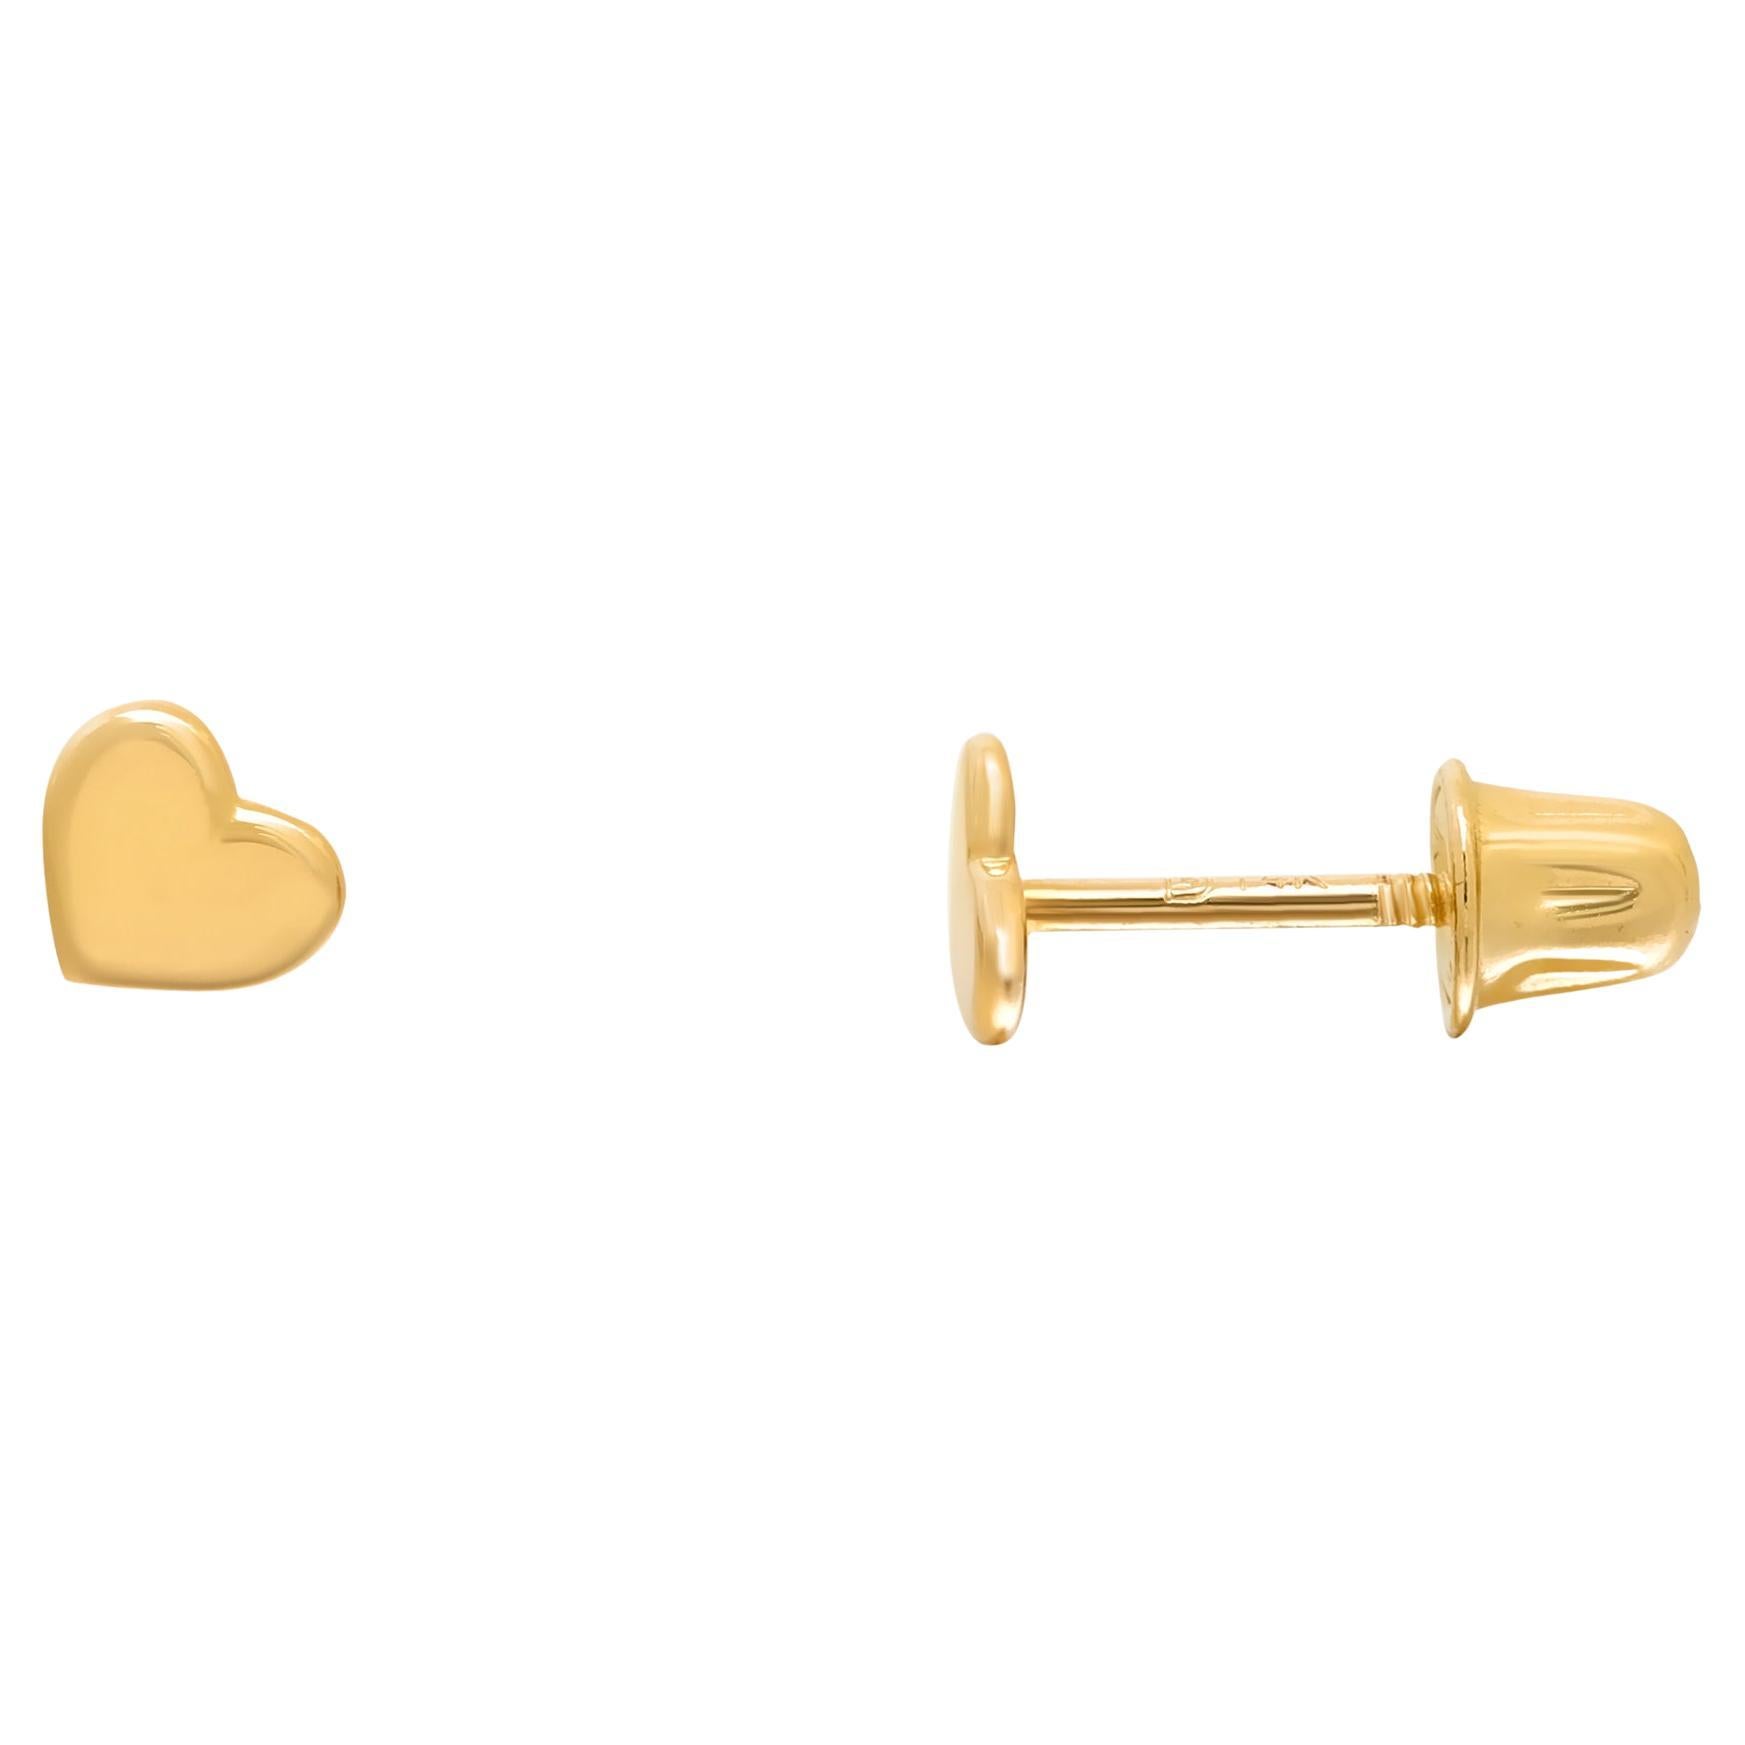 Sparkle love around you with these cute little hearts. Dainty and tiny, these heart stud earrings are easy and perfect for everyday wear. Crafted in highly polished 14K yellow gold. Earring size: 3.5mm. Secured with screw back posts. Great for